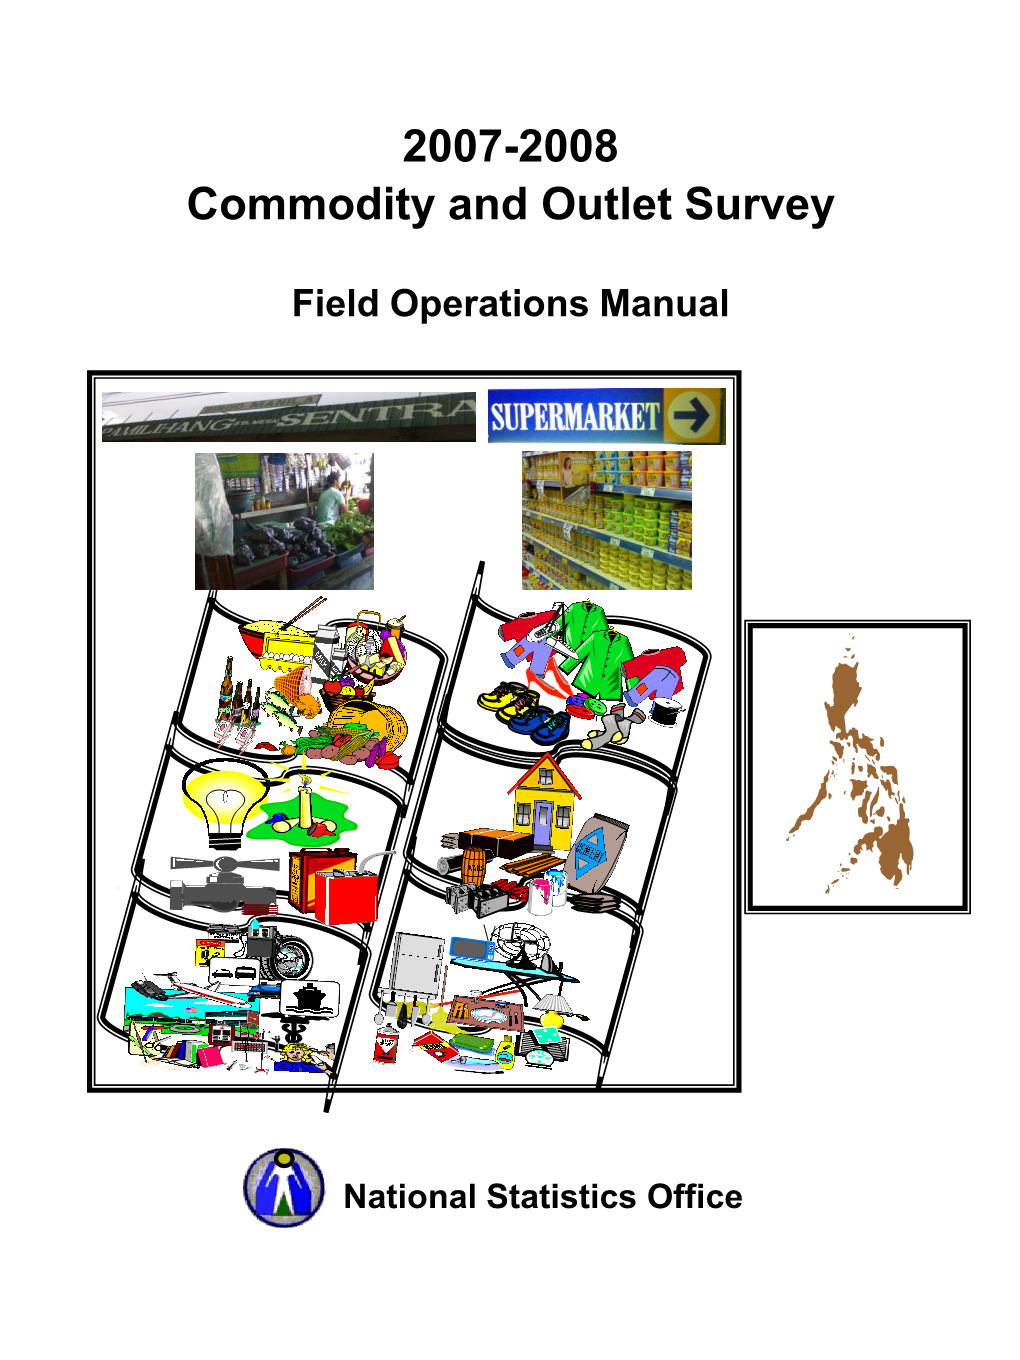 2007-2008 Commodity and Outlet Survey